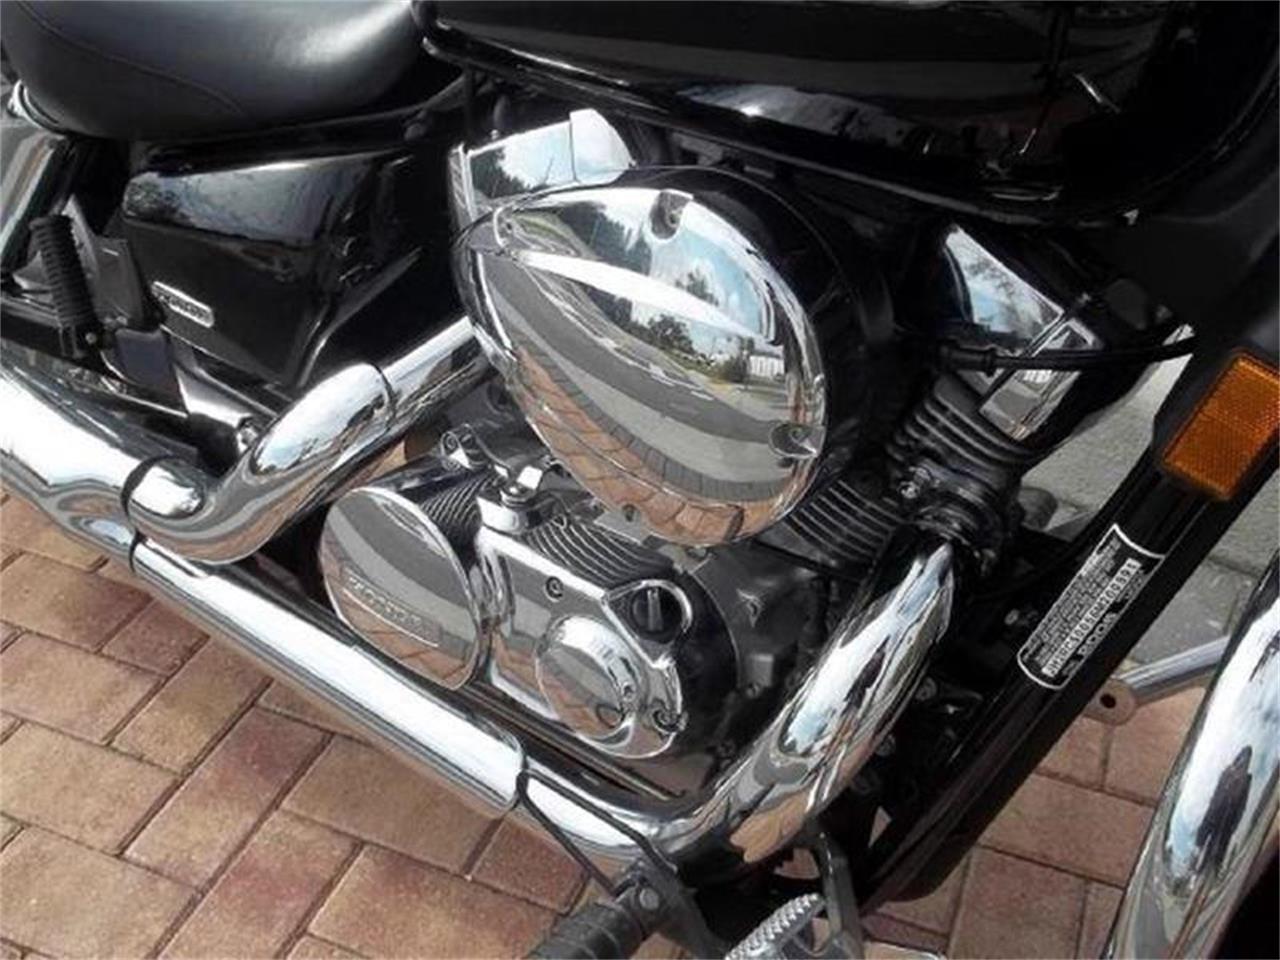 2006 Honda Motorcycle for sale in Clearwater, FL – photo 15